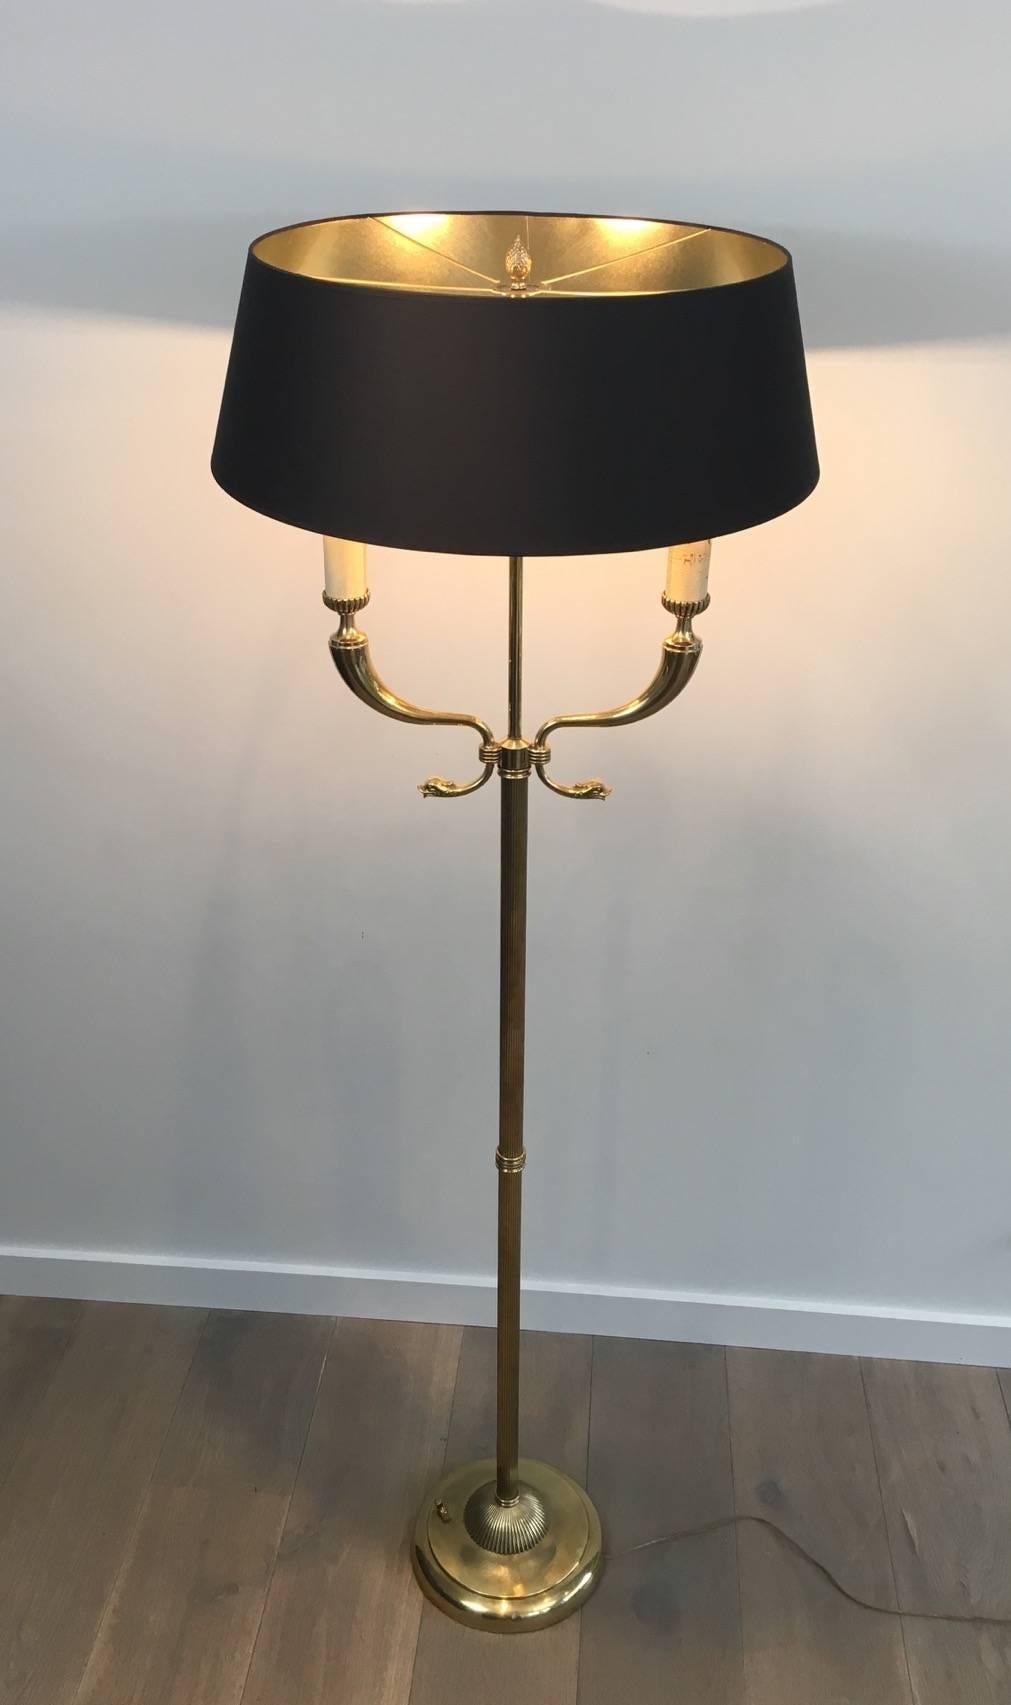 Beautiful brass floor lamp with dolphin heads with double light socket. Attributed to Maison Jansen, French, circa 1940s.

This lamp is currently in France, please allow 4 to 6 weeks for delivery to our warehouse in Long Island City.